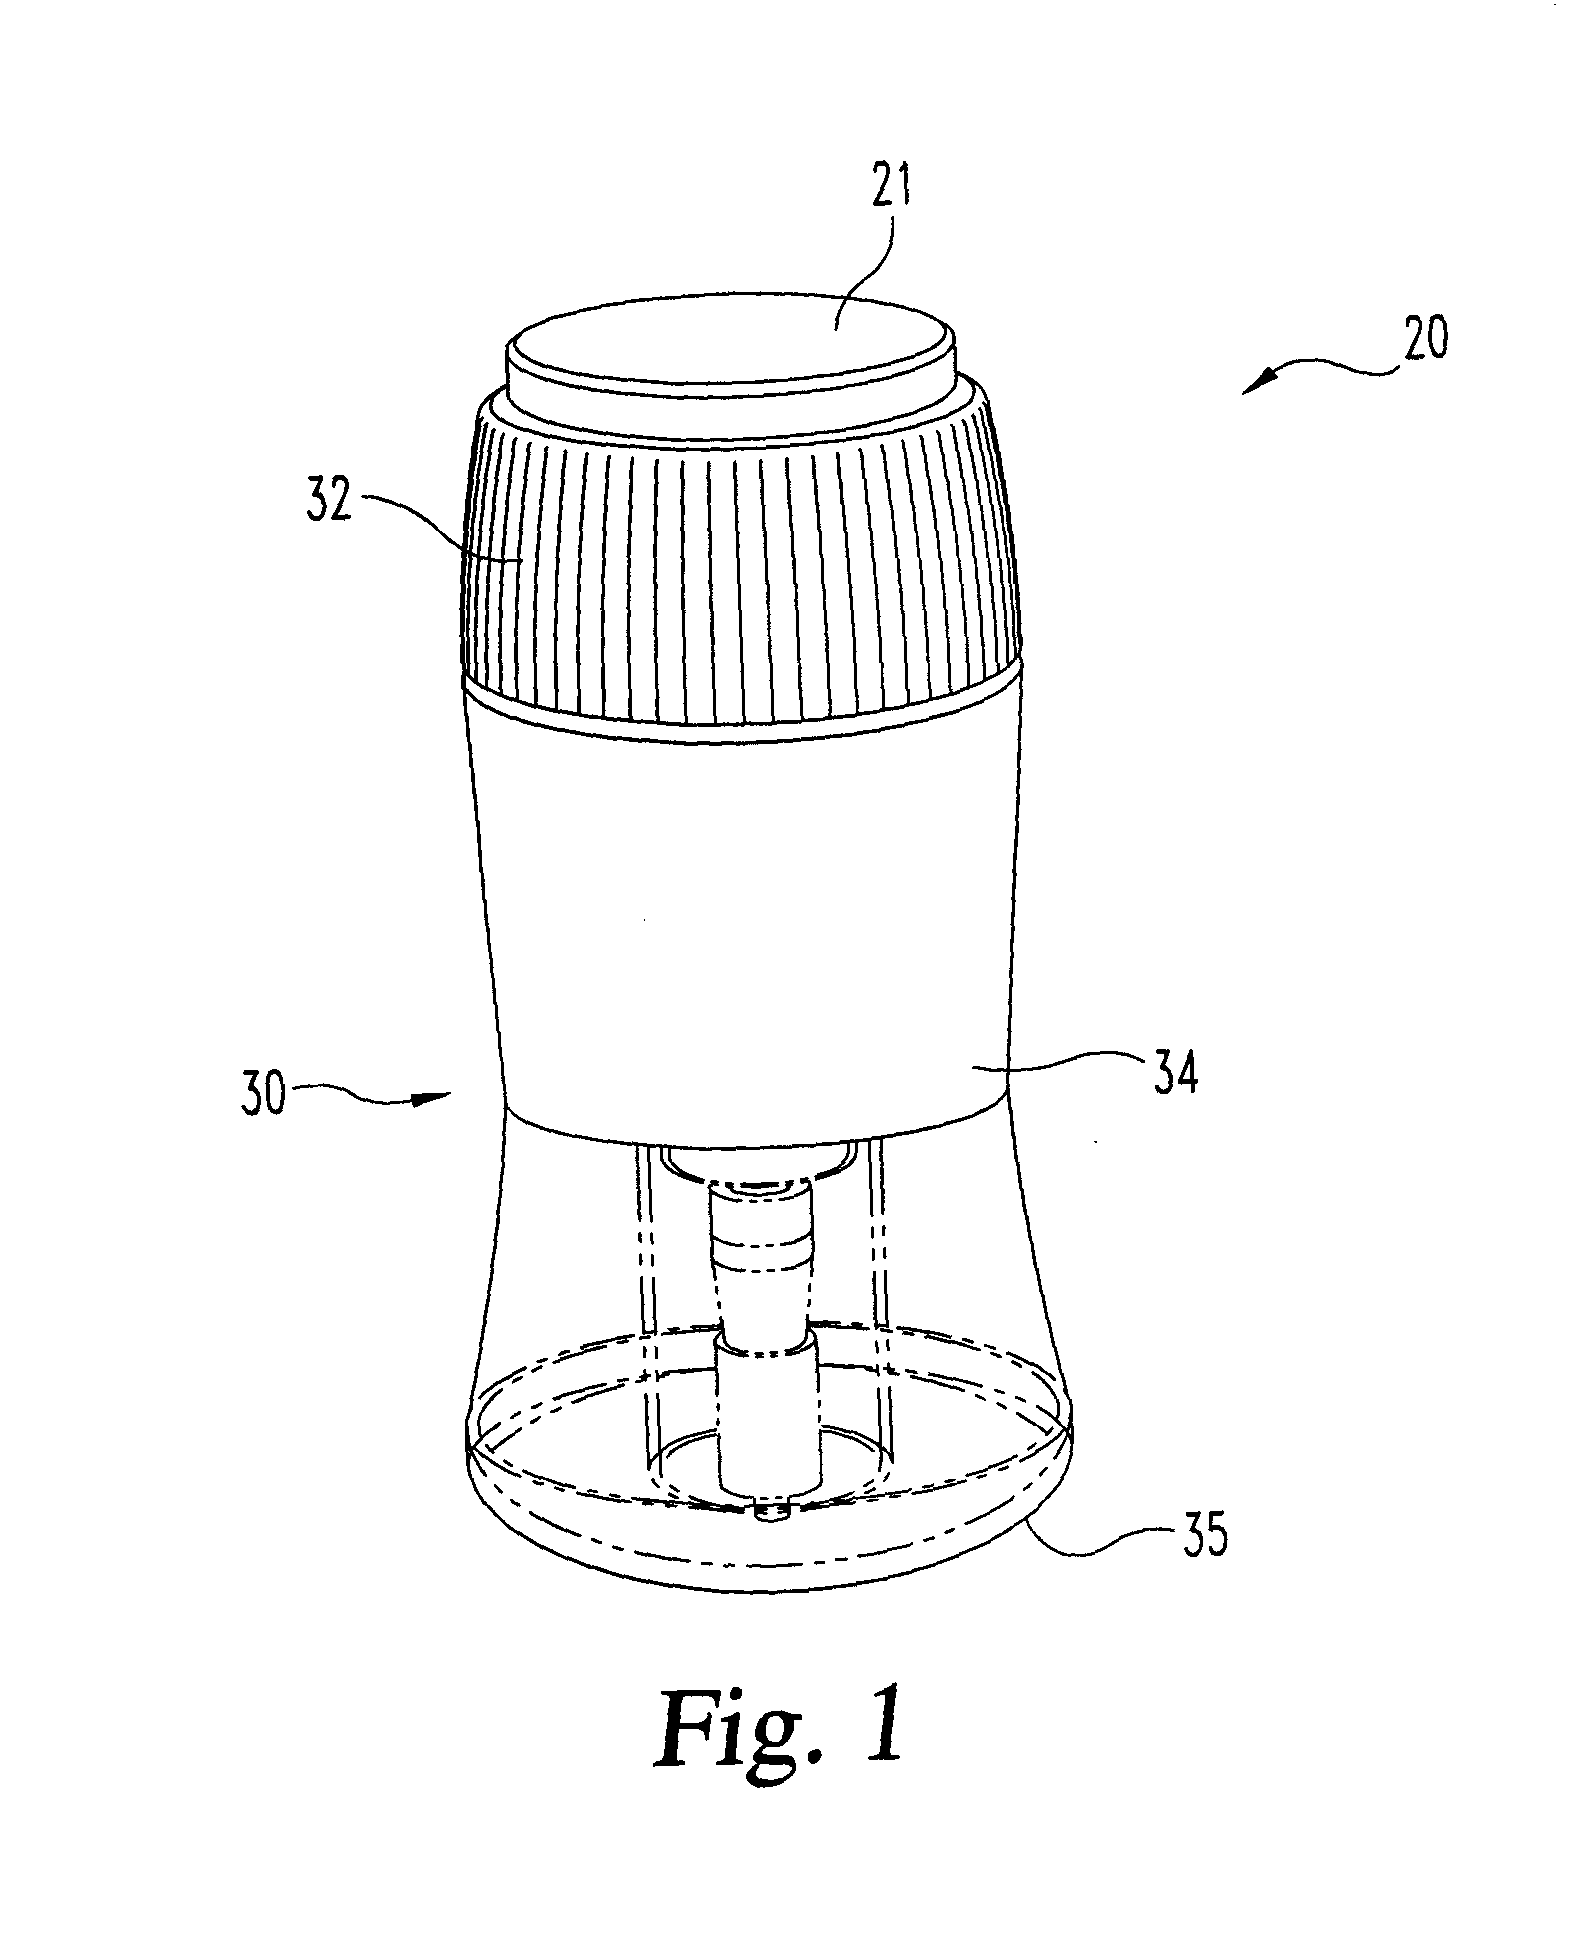 Delay mechanism suitable for compact automatic injection device